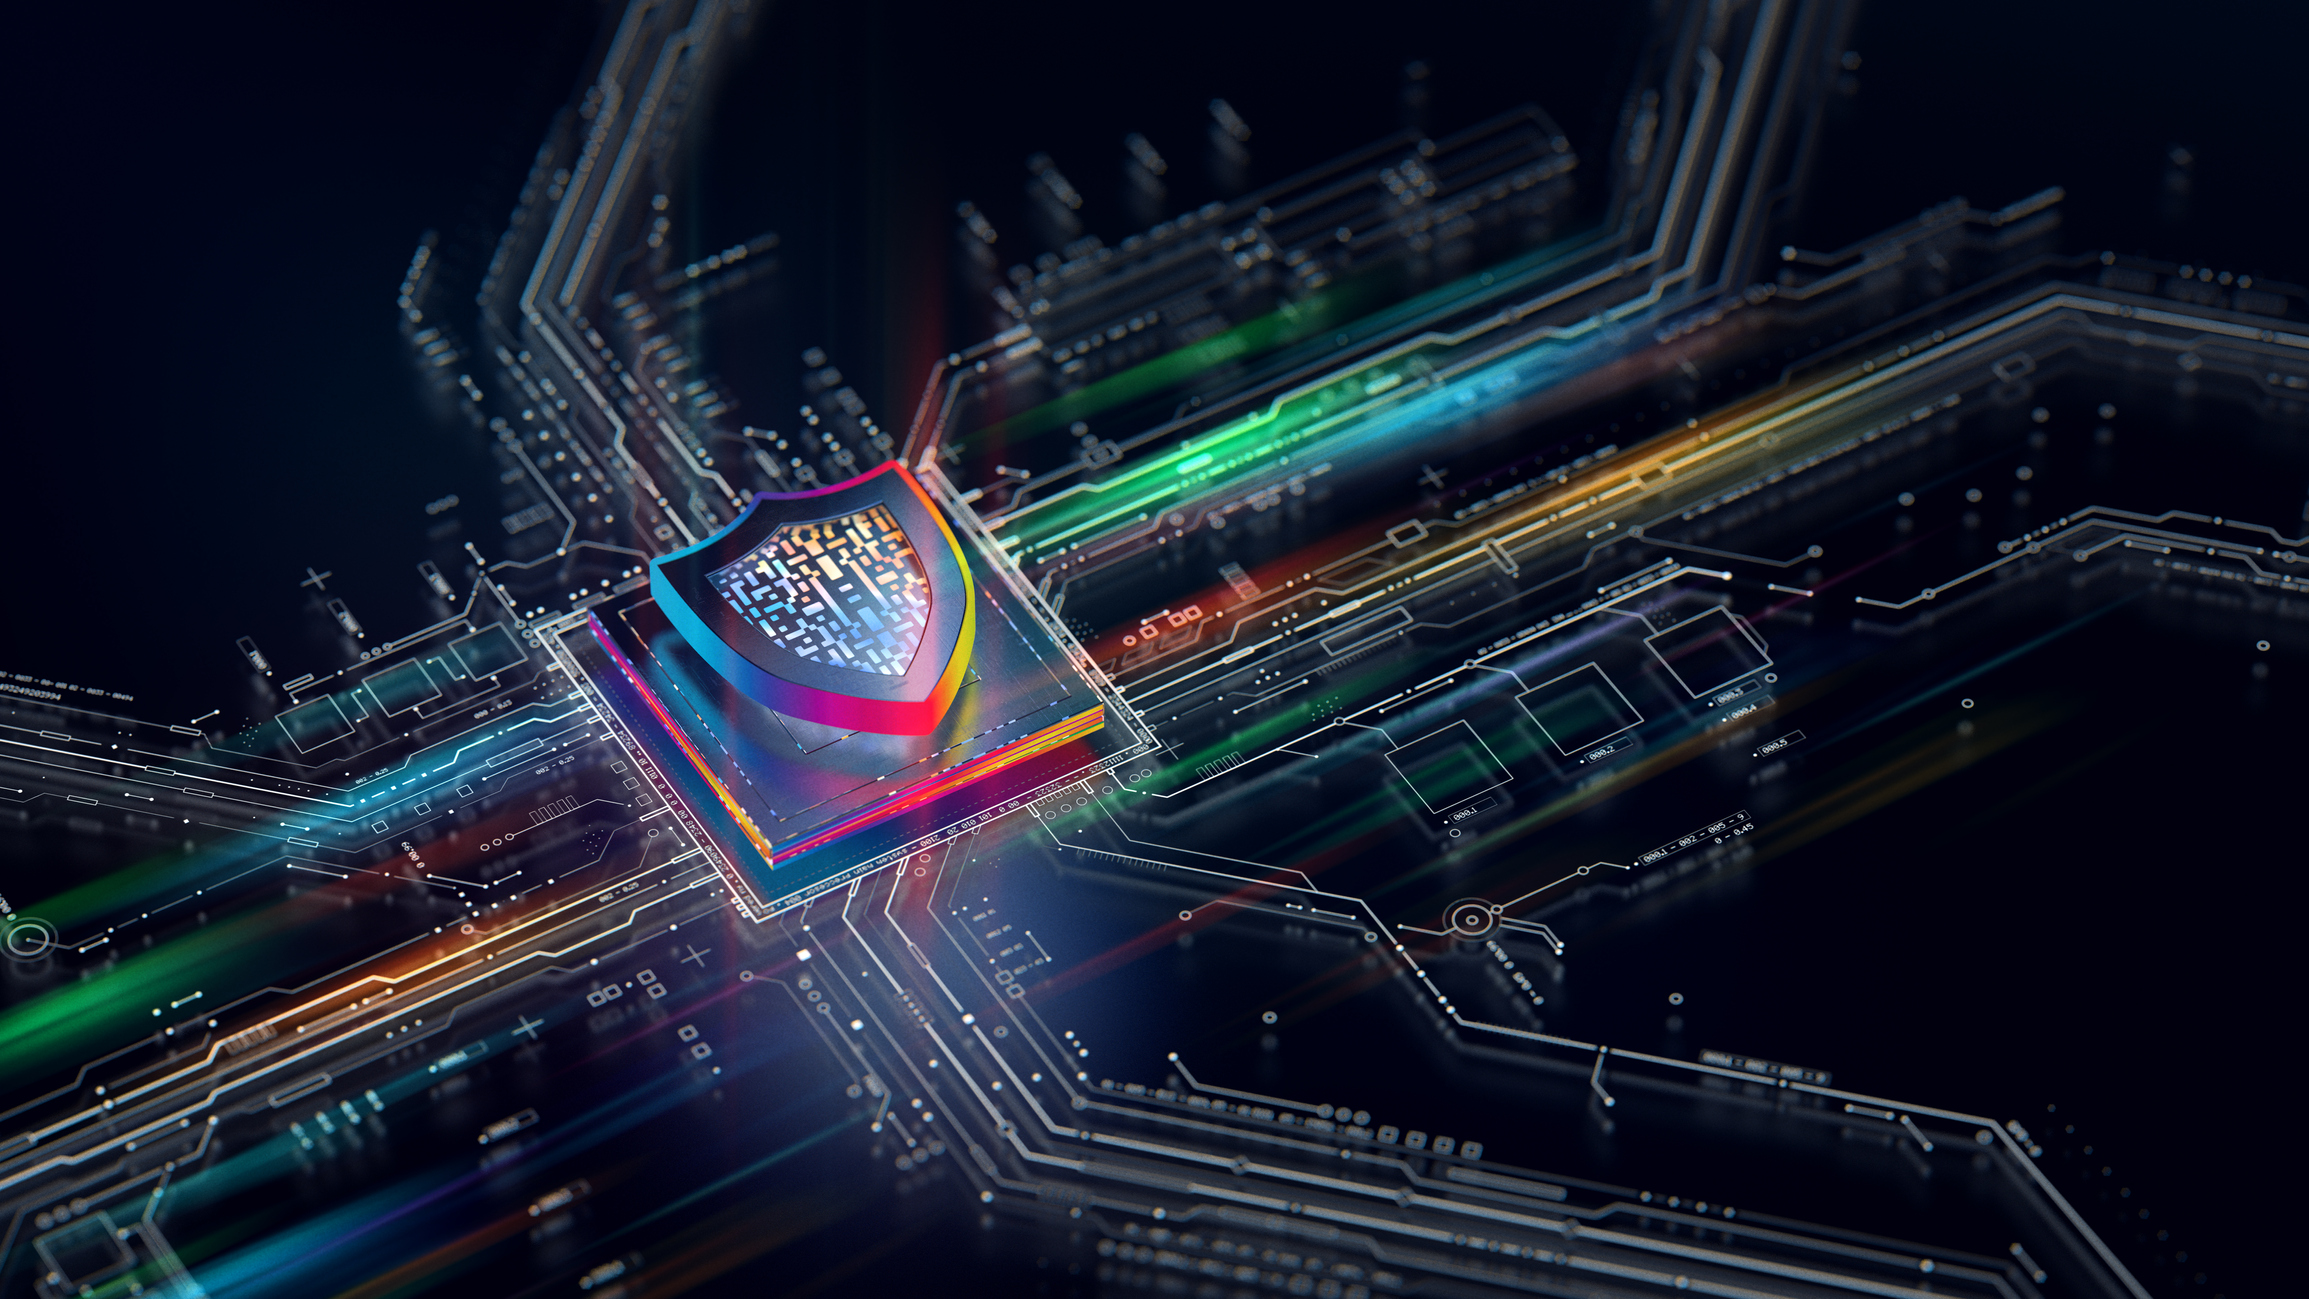 A shield on a computer chip to represent vulnerability management and cyber security patches. The shield is colored in rainbow colors, with fine points of light coming out of it to represent the energy flowing through the motherboard.